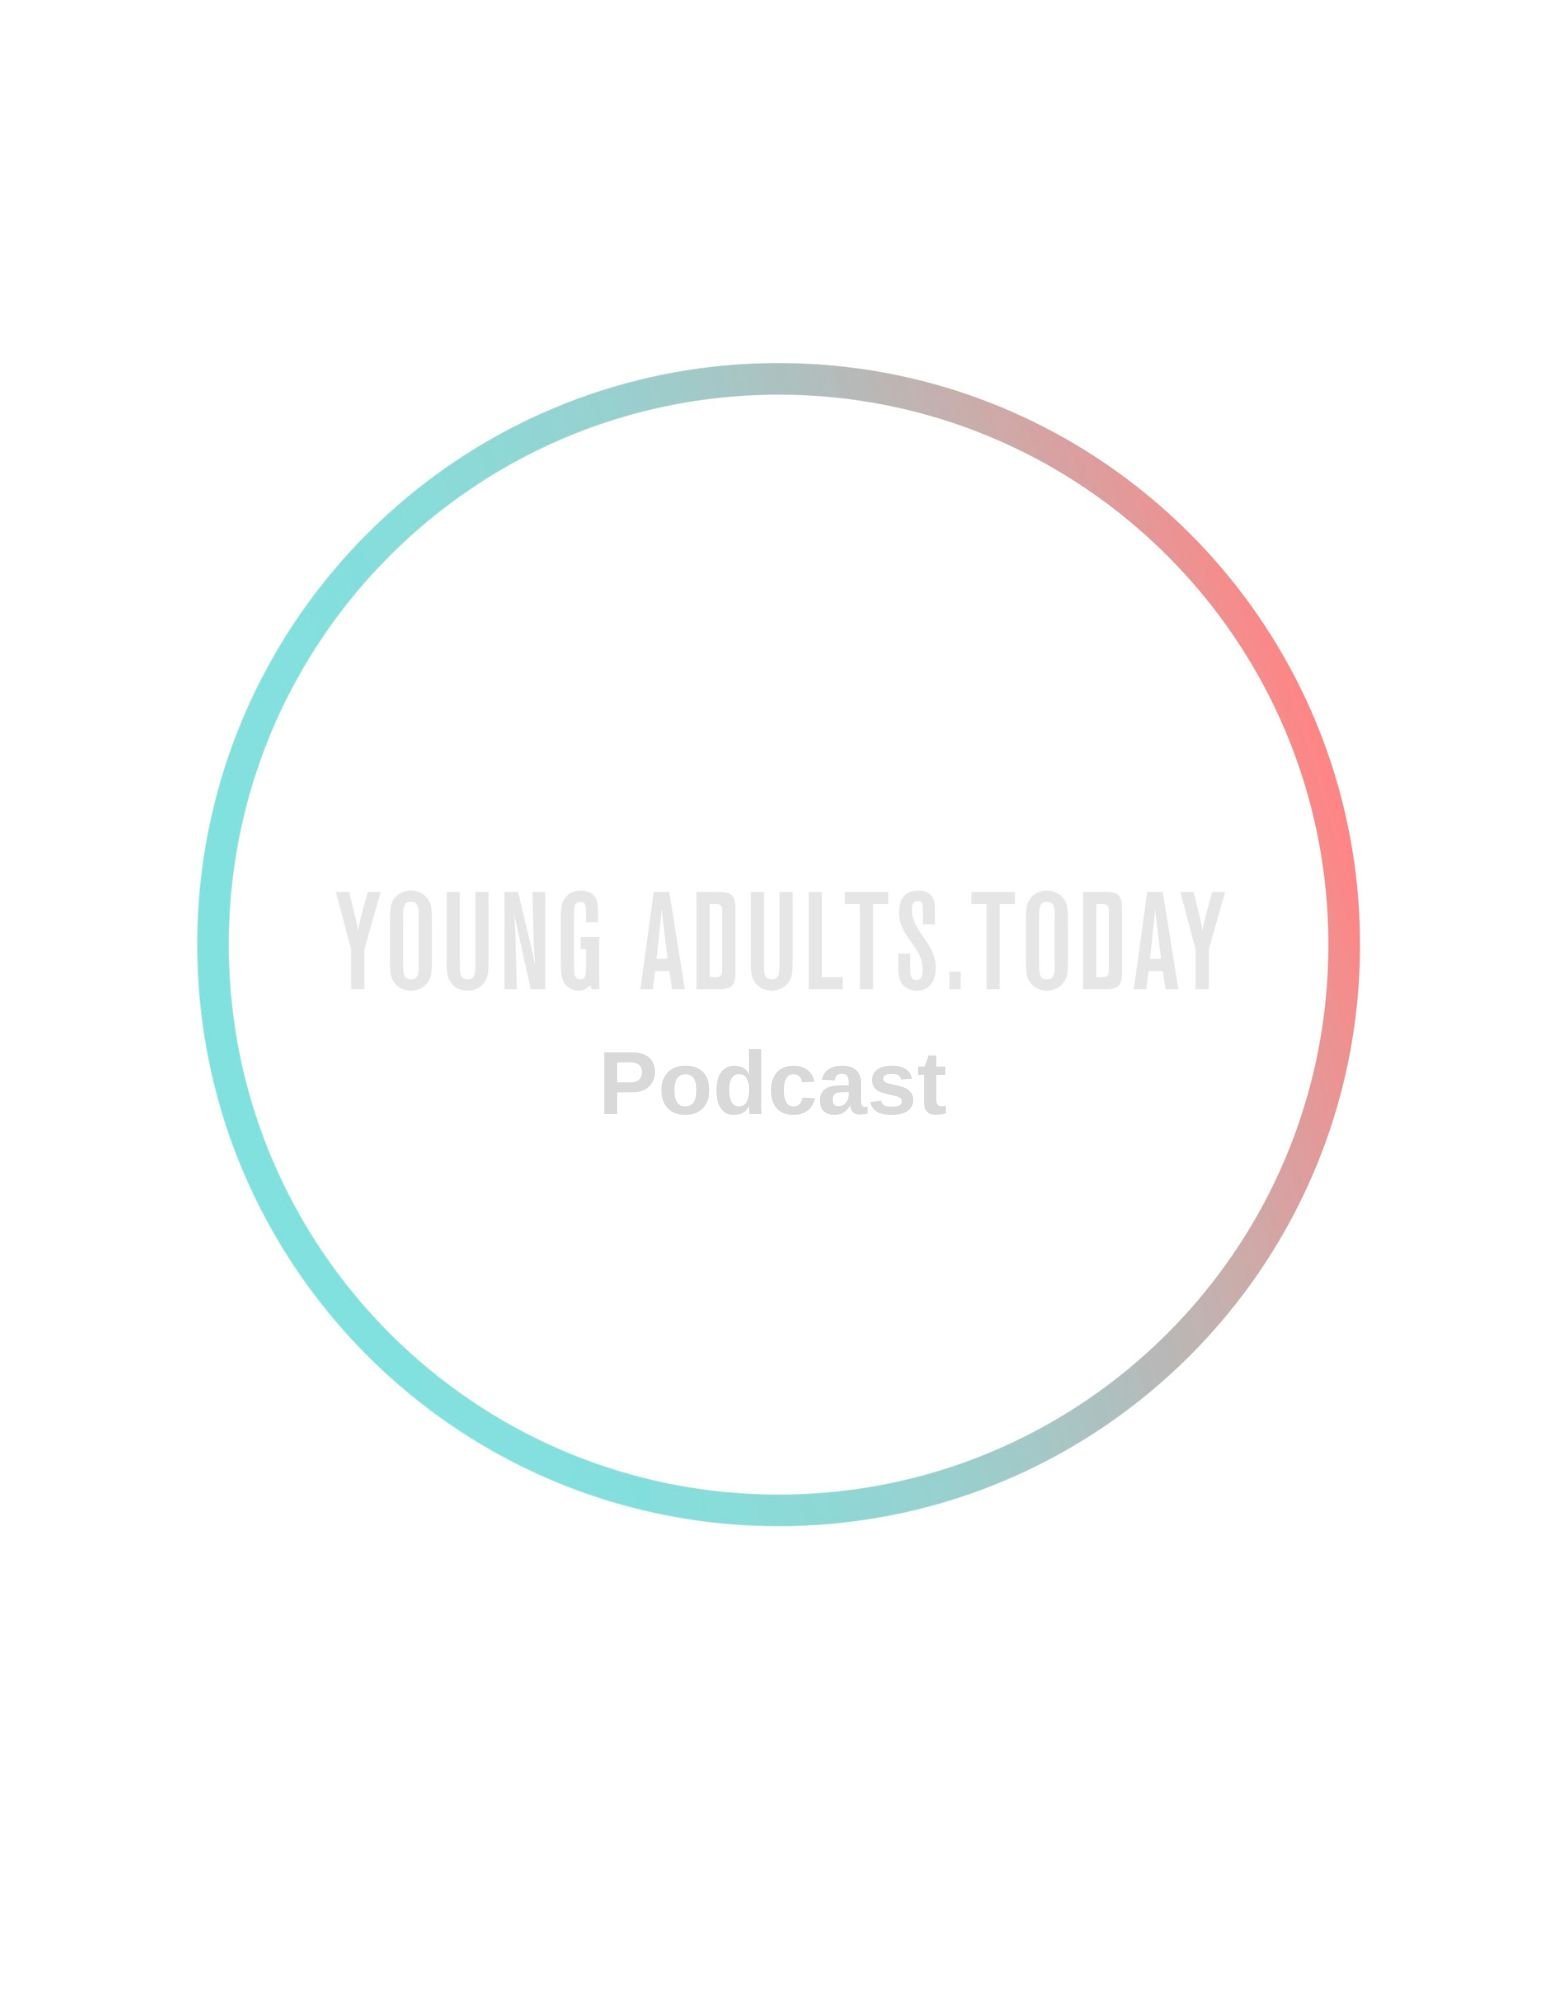 Young Adults.Today Logo Light 1.pdf-2.jpg